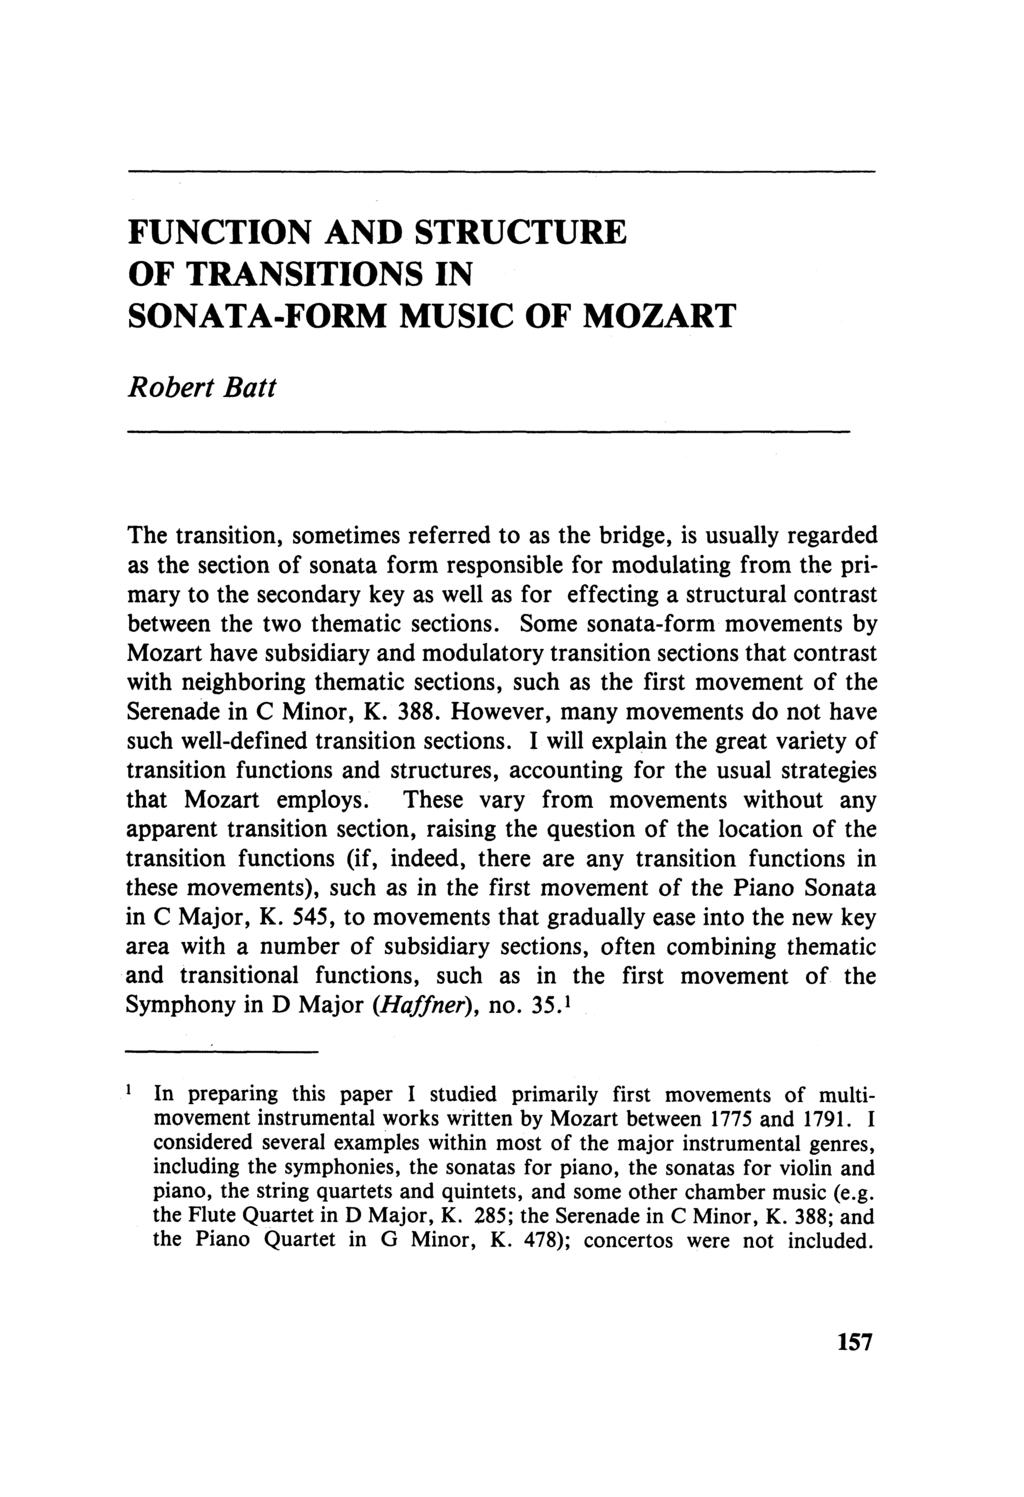 FUNCTION AND STRUCTURE OF TRANSITIONS IN SONATA-FORM MUSIC OF MOZART Robert Batt The transition, sometimes referred to as the bridge, is usually regarded as the section of sonata form responsible for